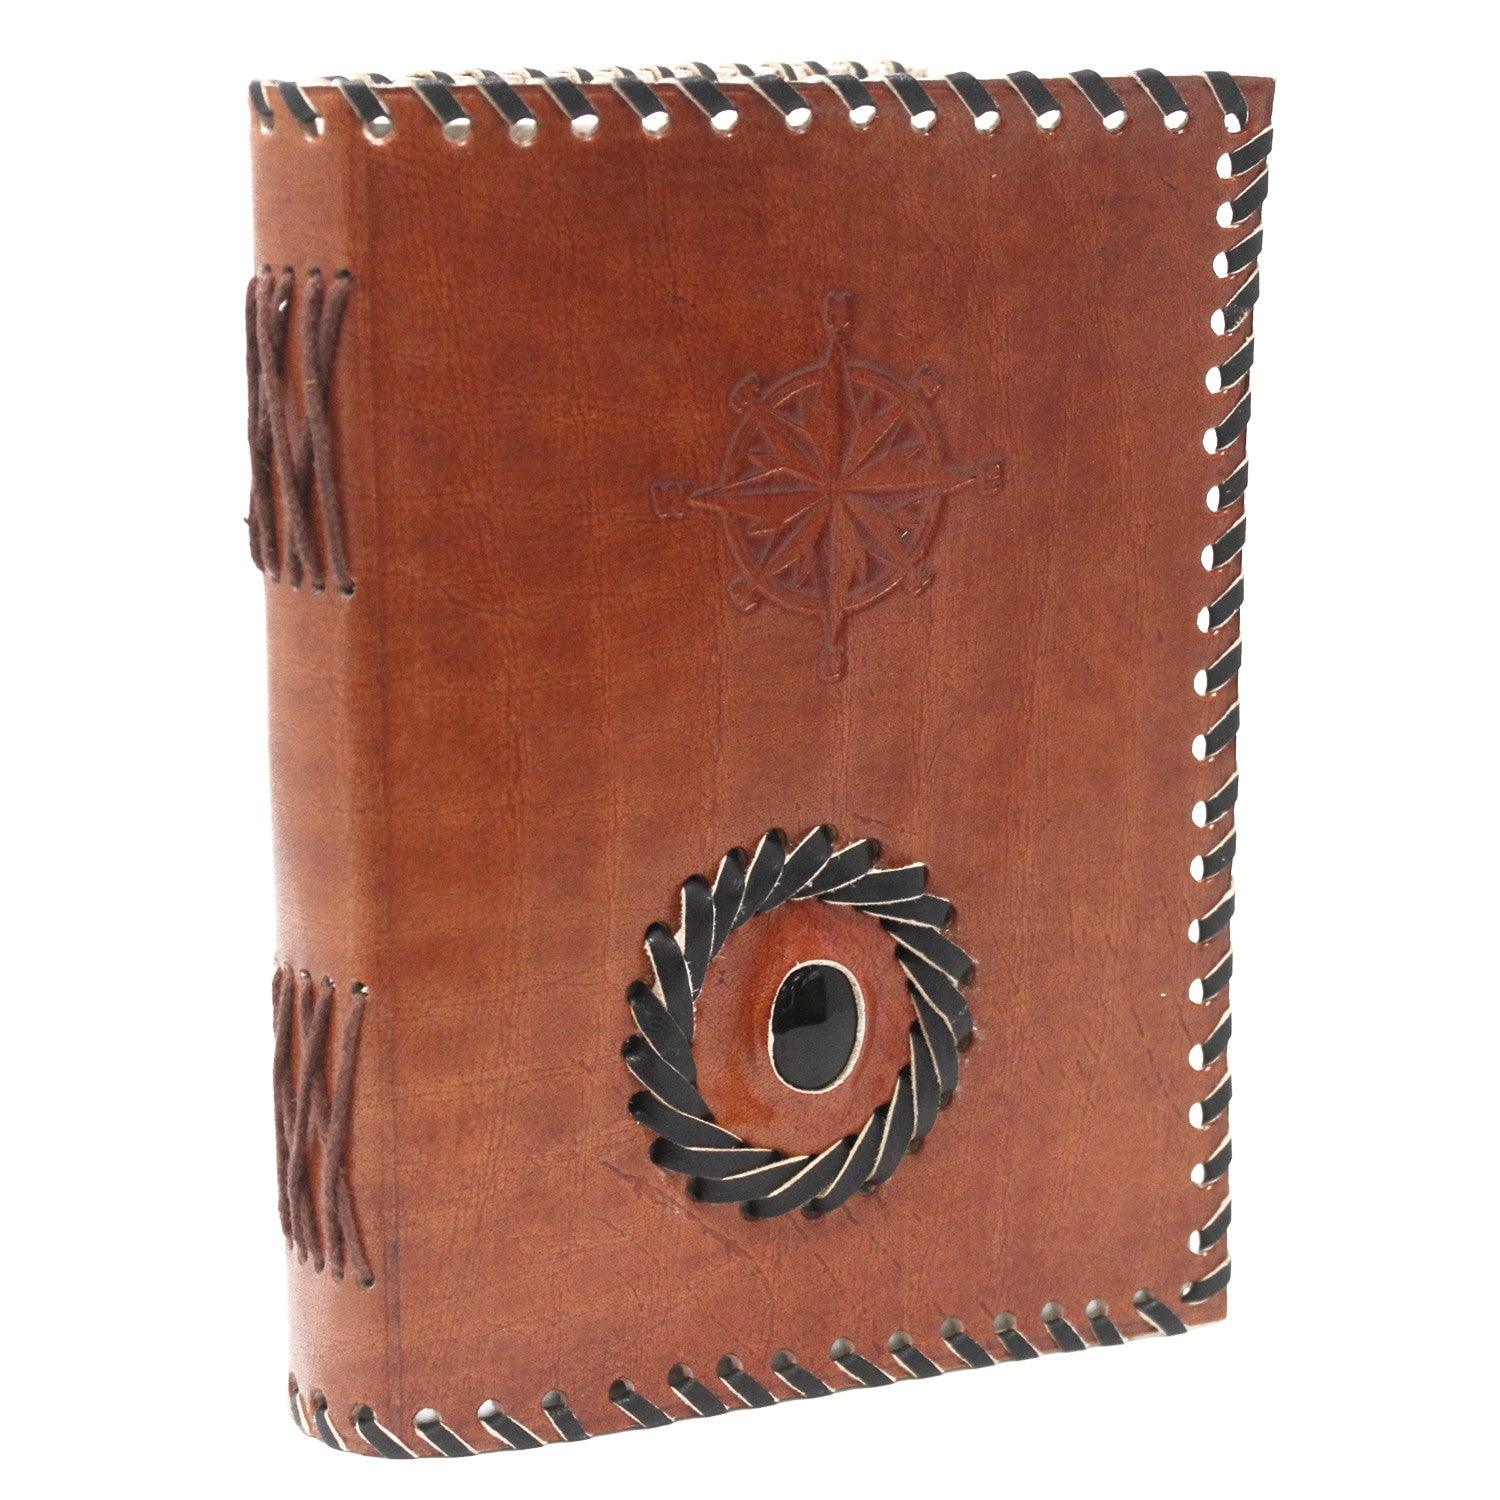 Leather Black onyx & Compas Notebook (7x5") - DuvetDay.co.uk